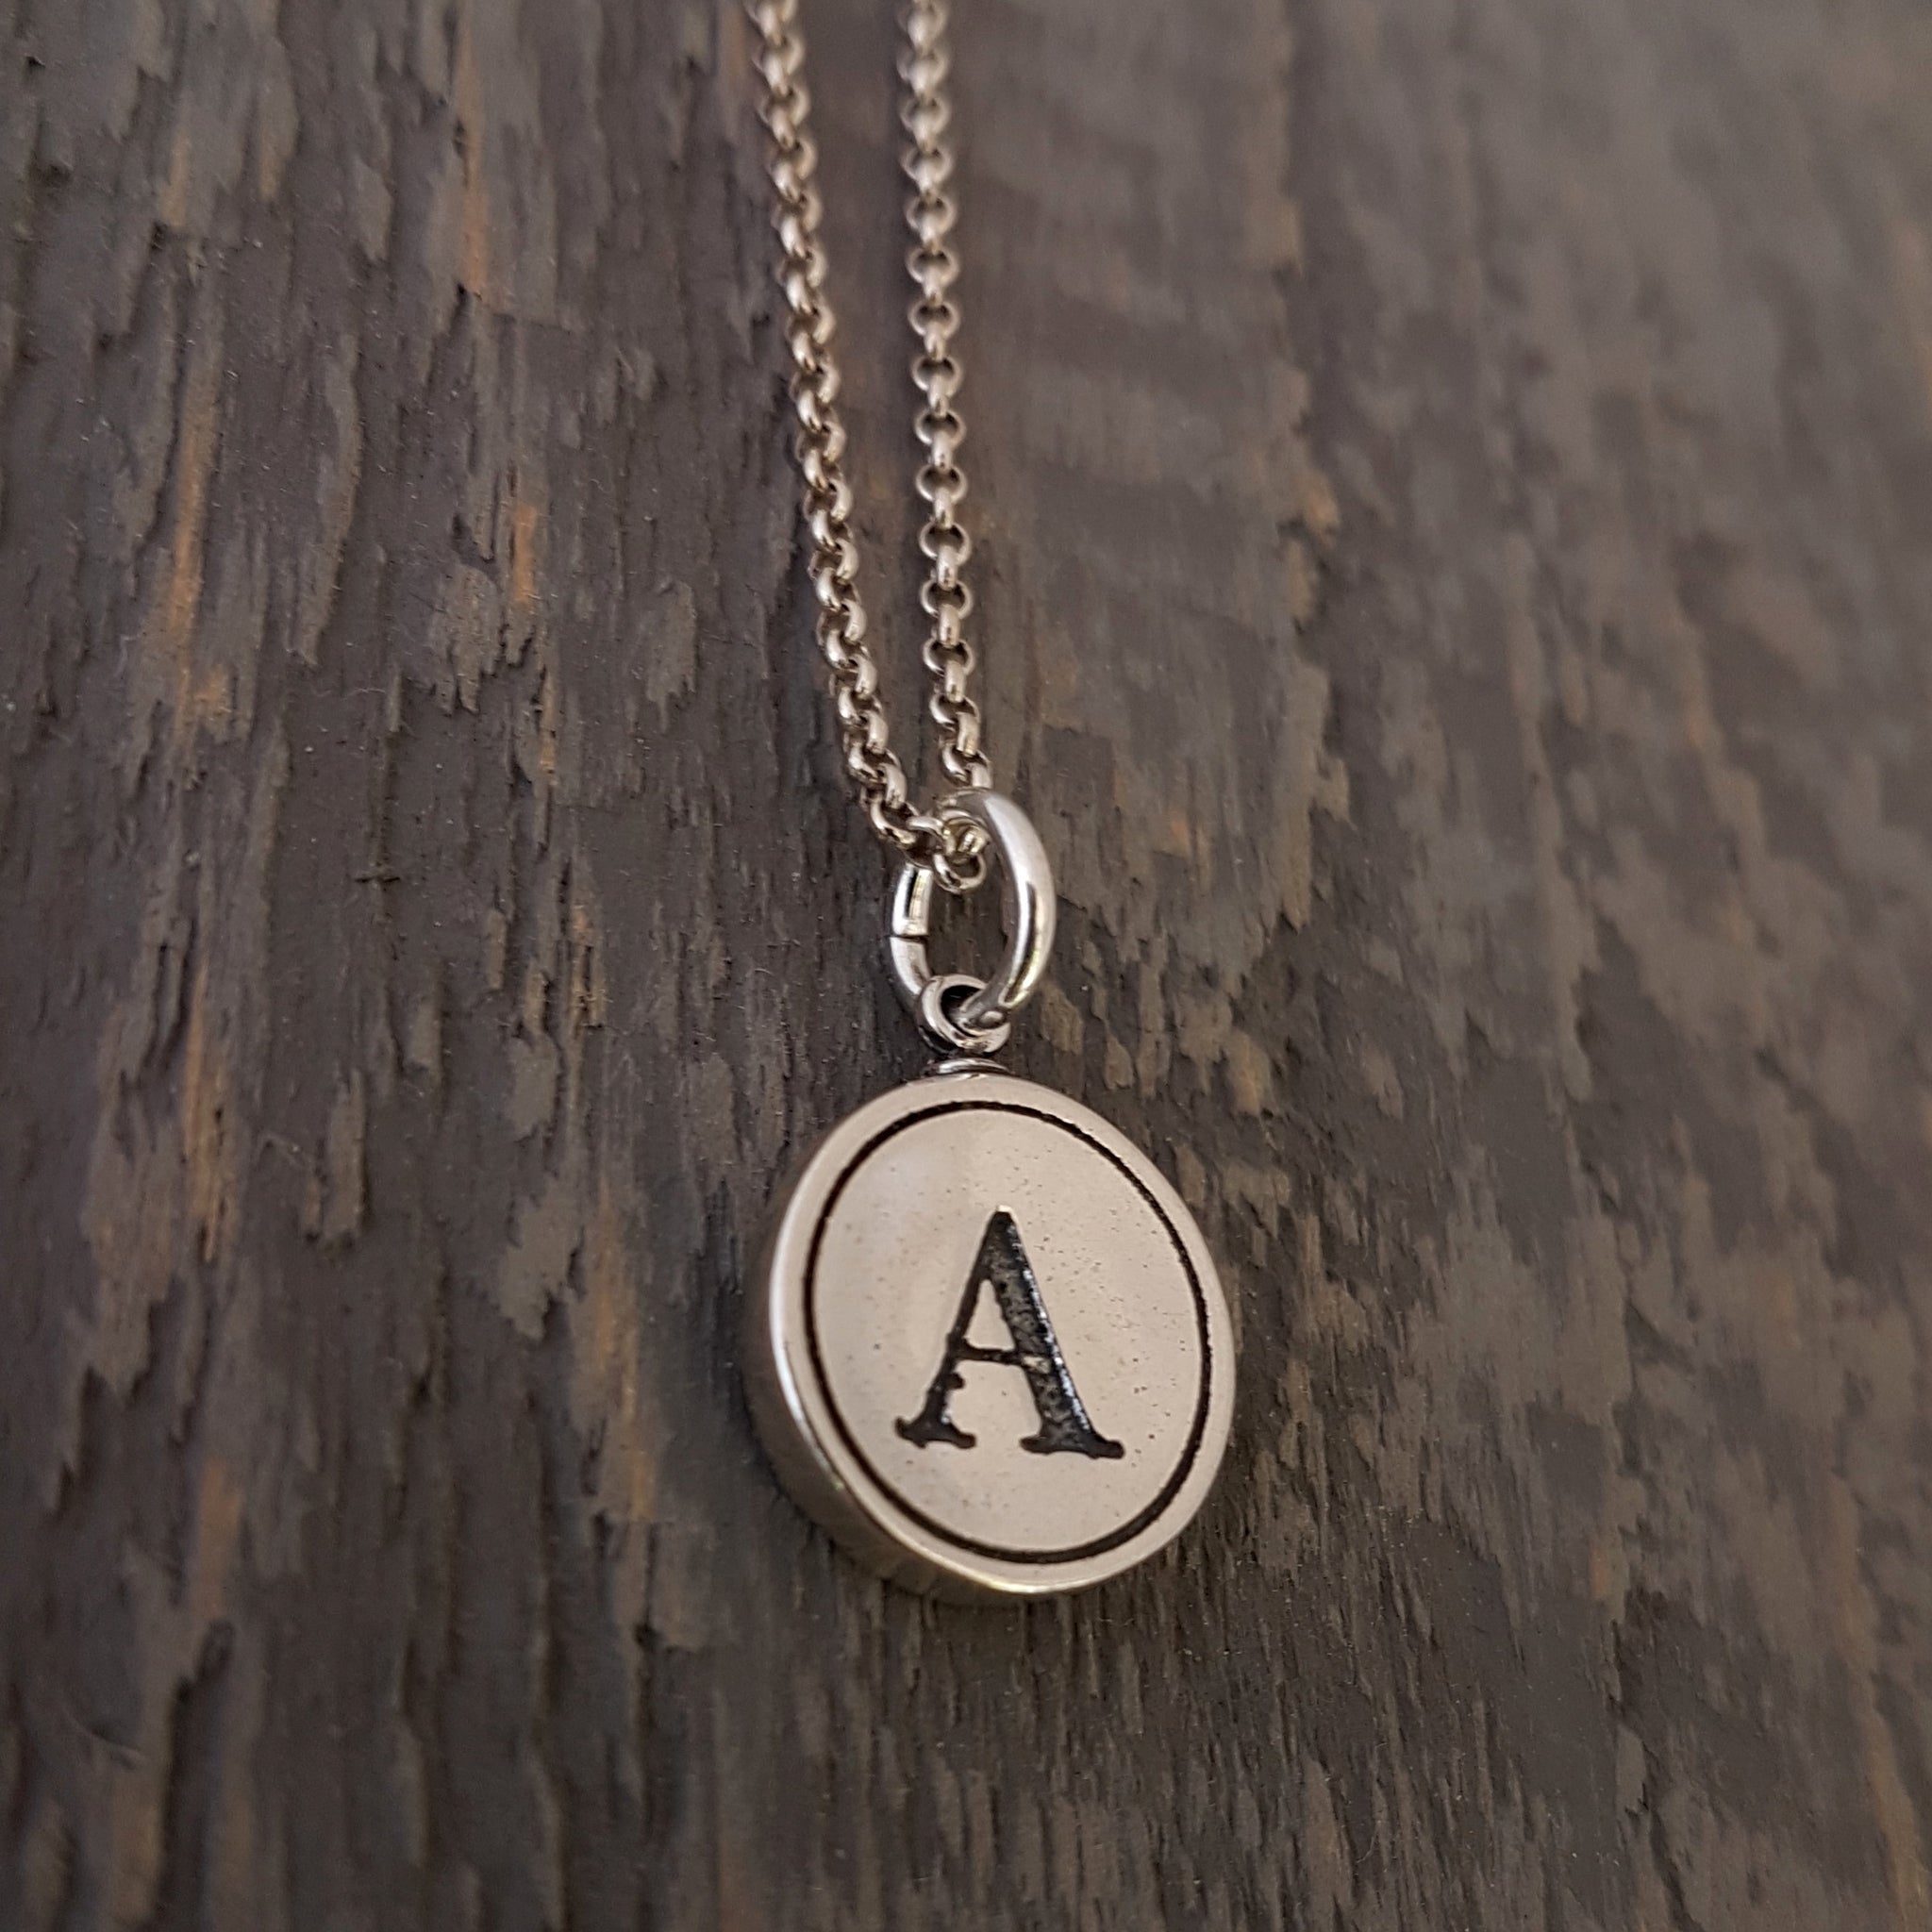 Initial Letter Necklace - Silver White Bronze - Gwen Delicious